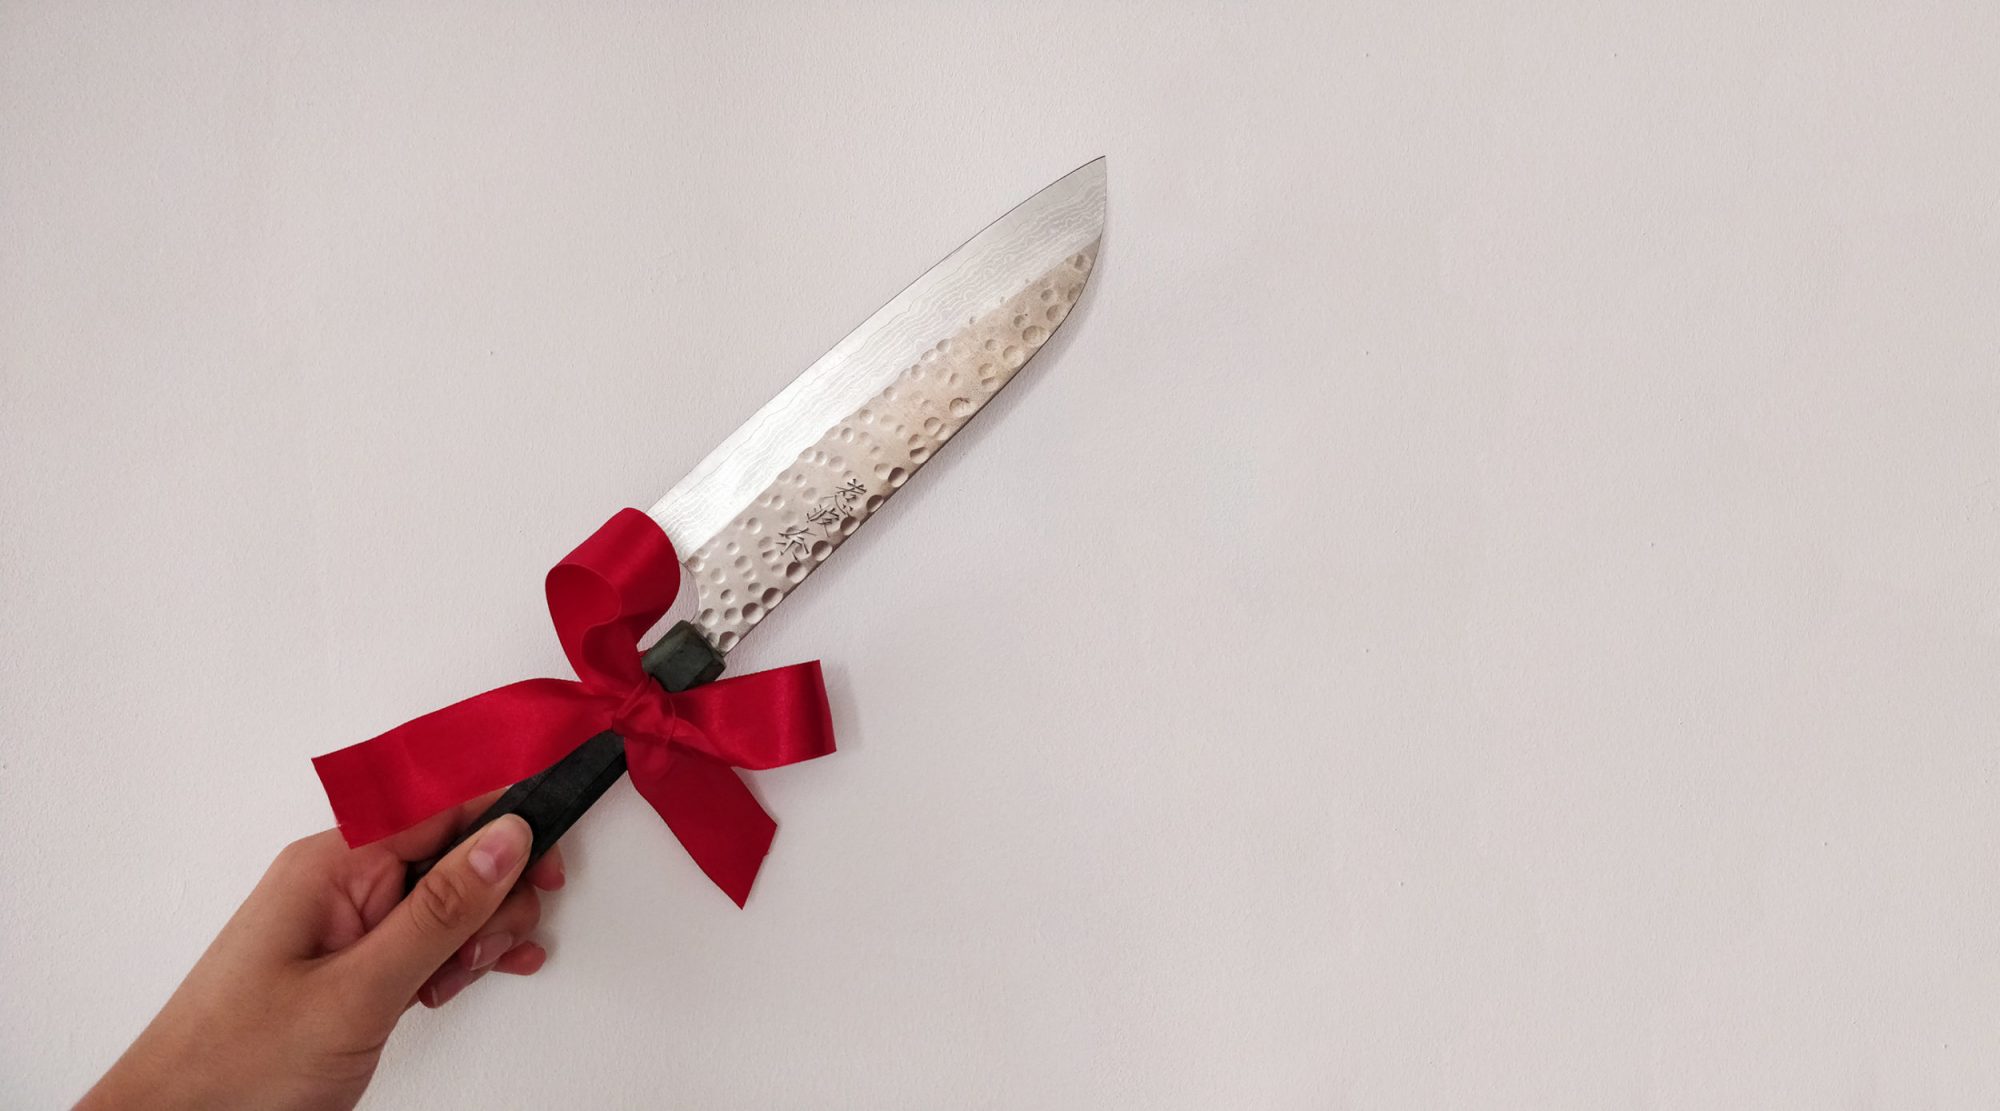 kitchen knives as a gift